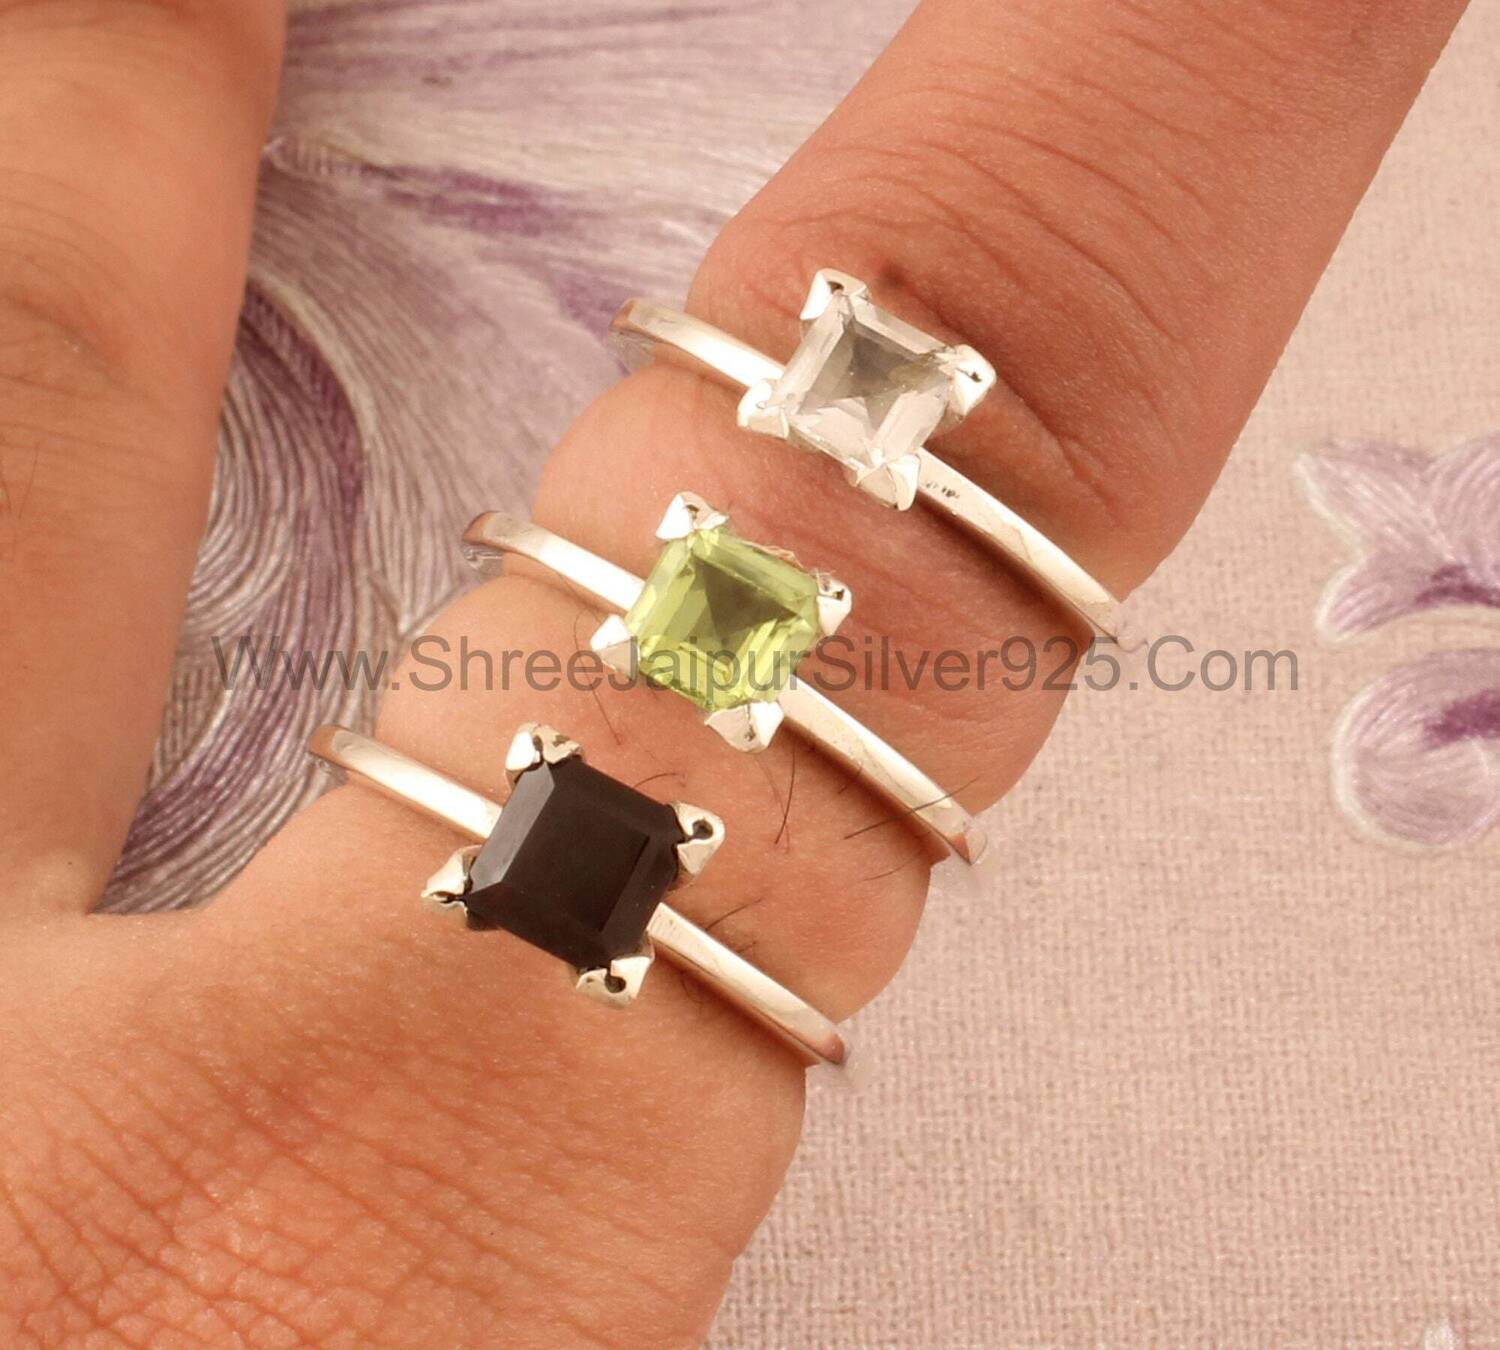 Multi Stones Rings Square Cut Prong Set Stone Solid 925 Sterling Silver Ring For Women, Handmade Prong Set Ring For Wedding Anniversary Gift